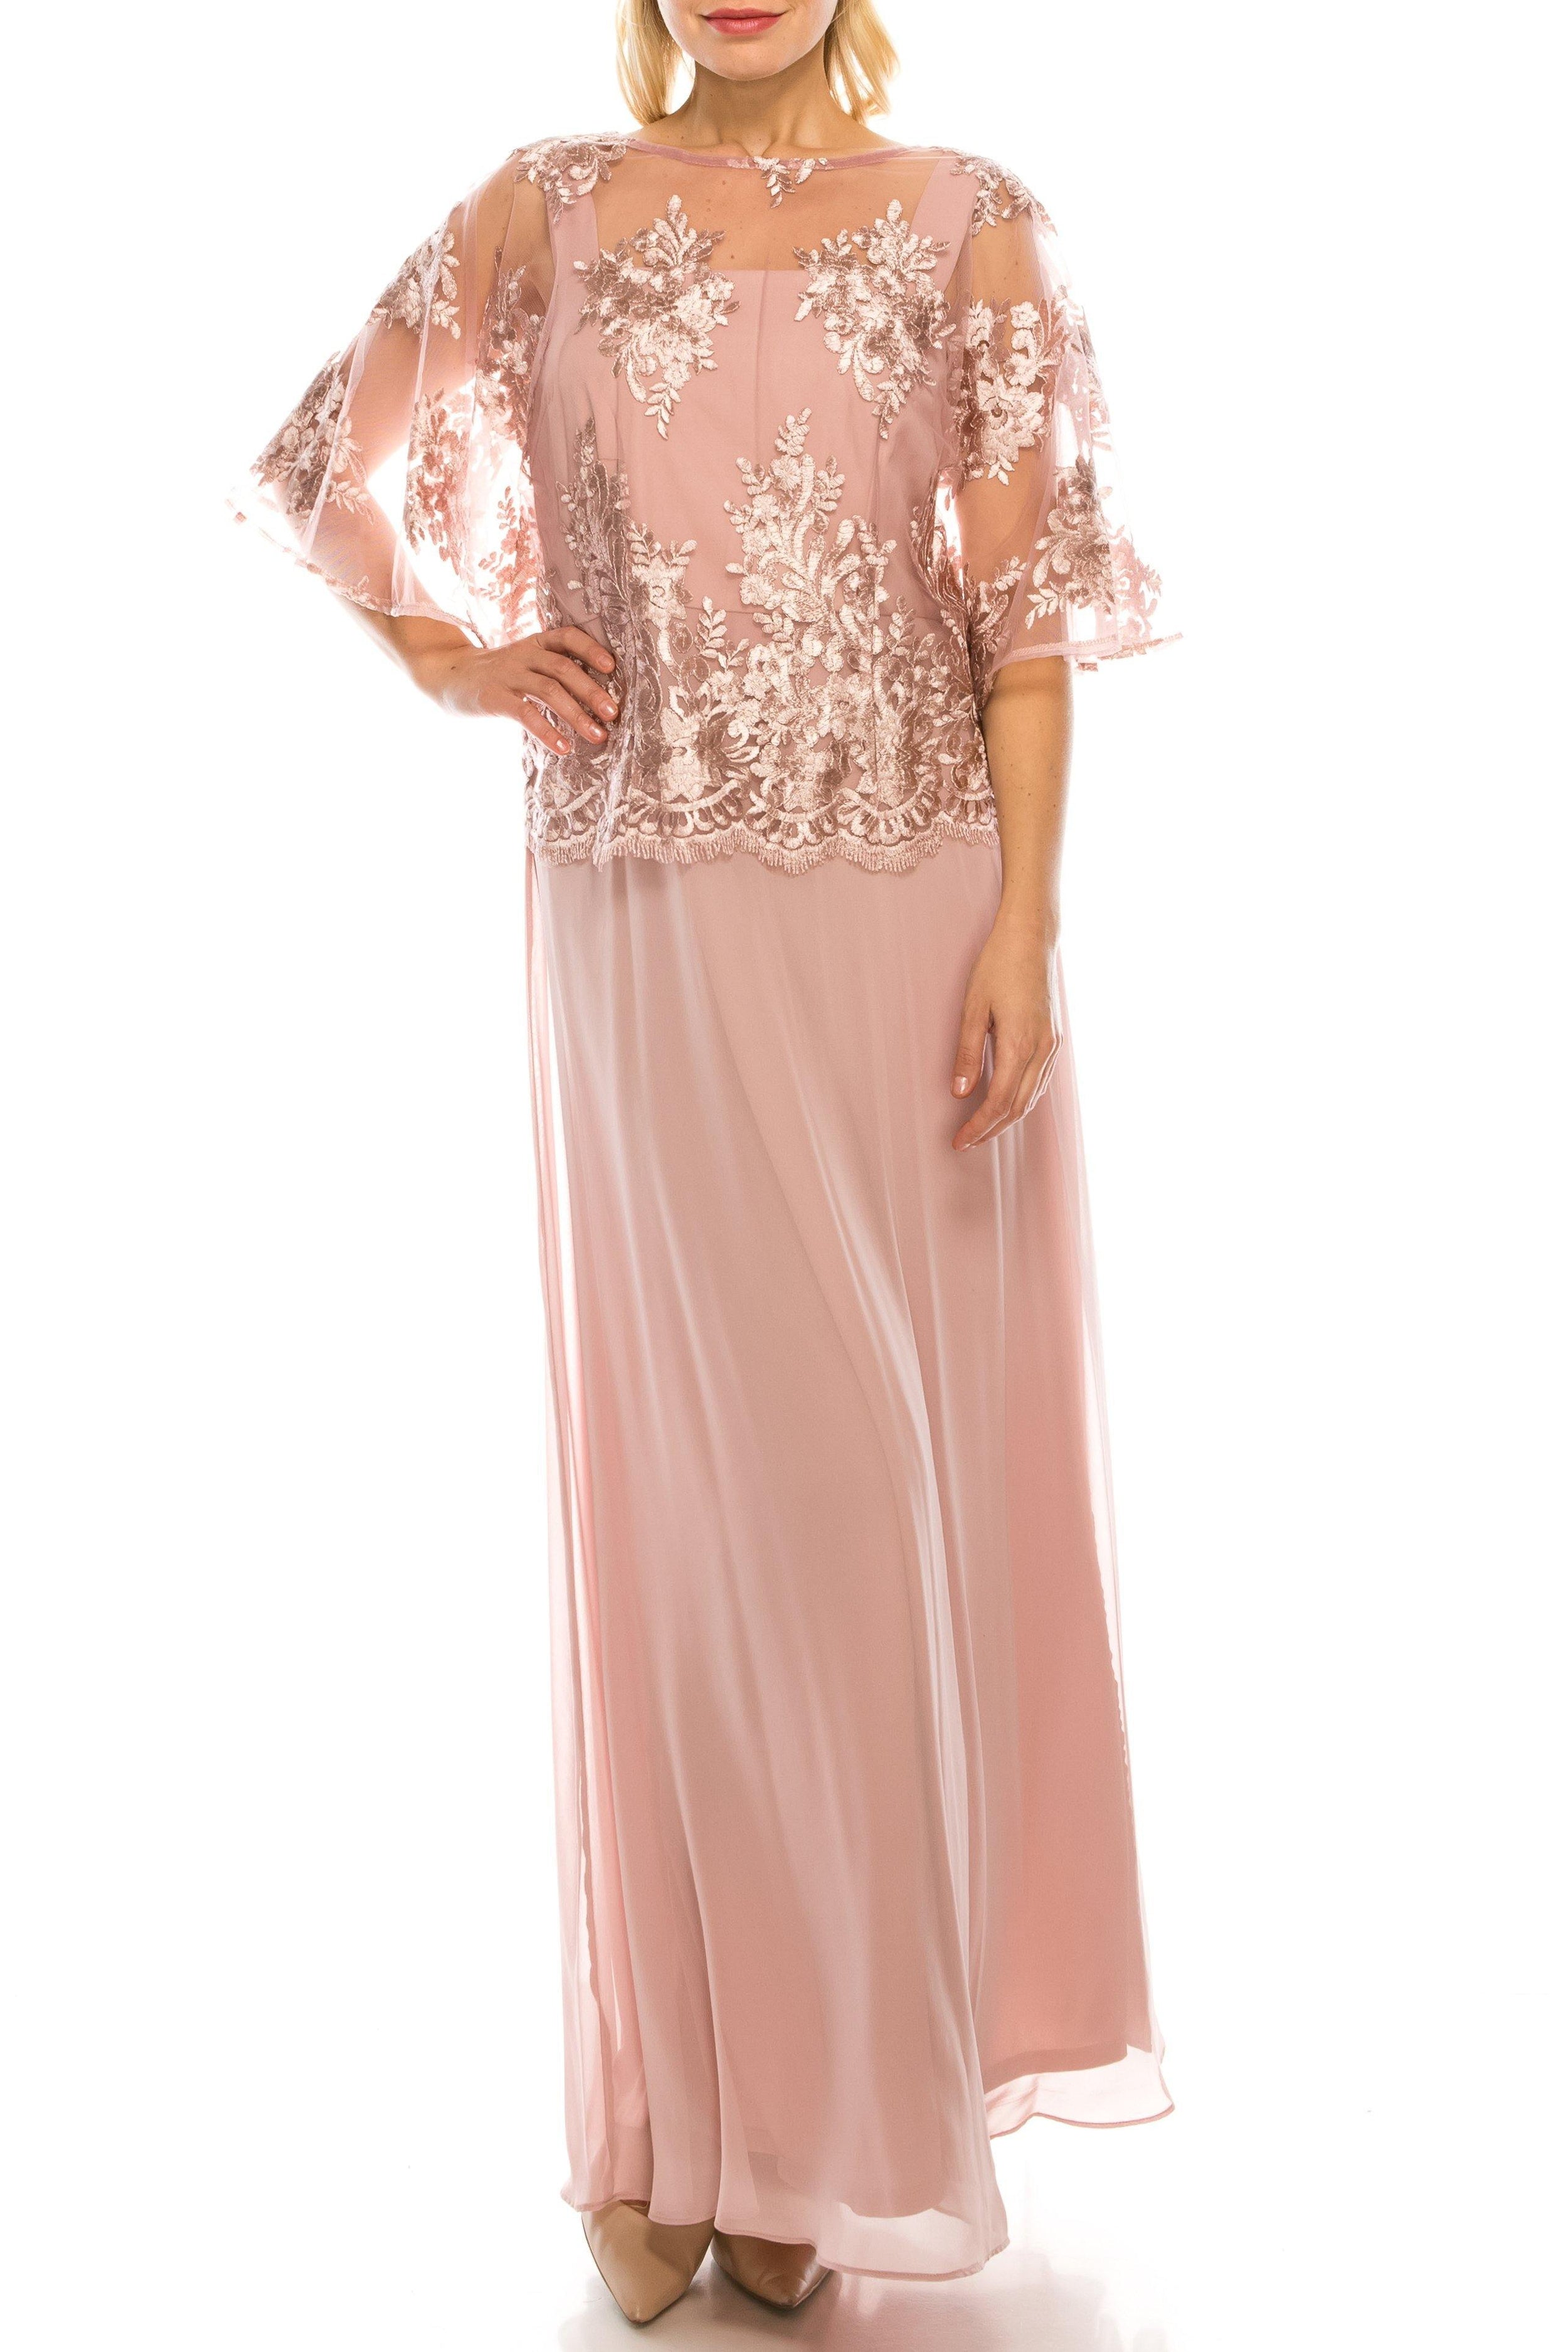 Le Bos Rose Long Formal Mother of the Bride Dress - The Dress Outlet